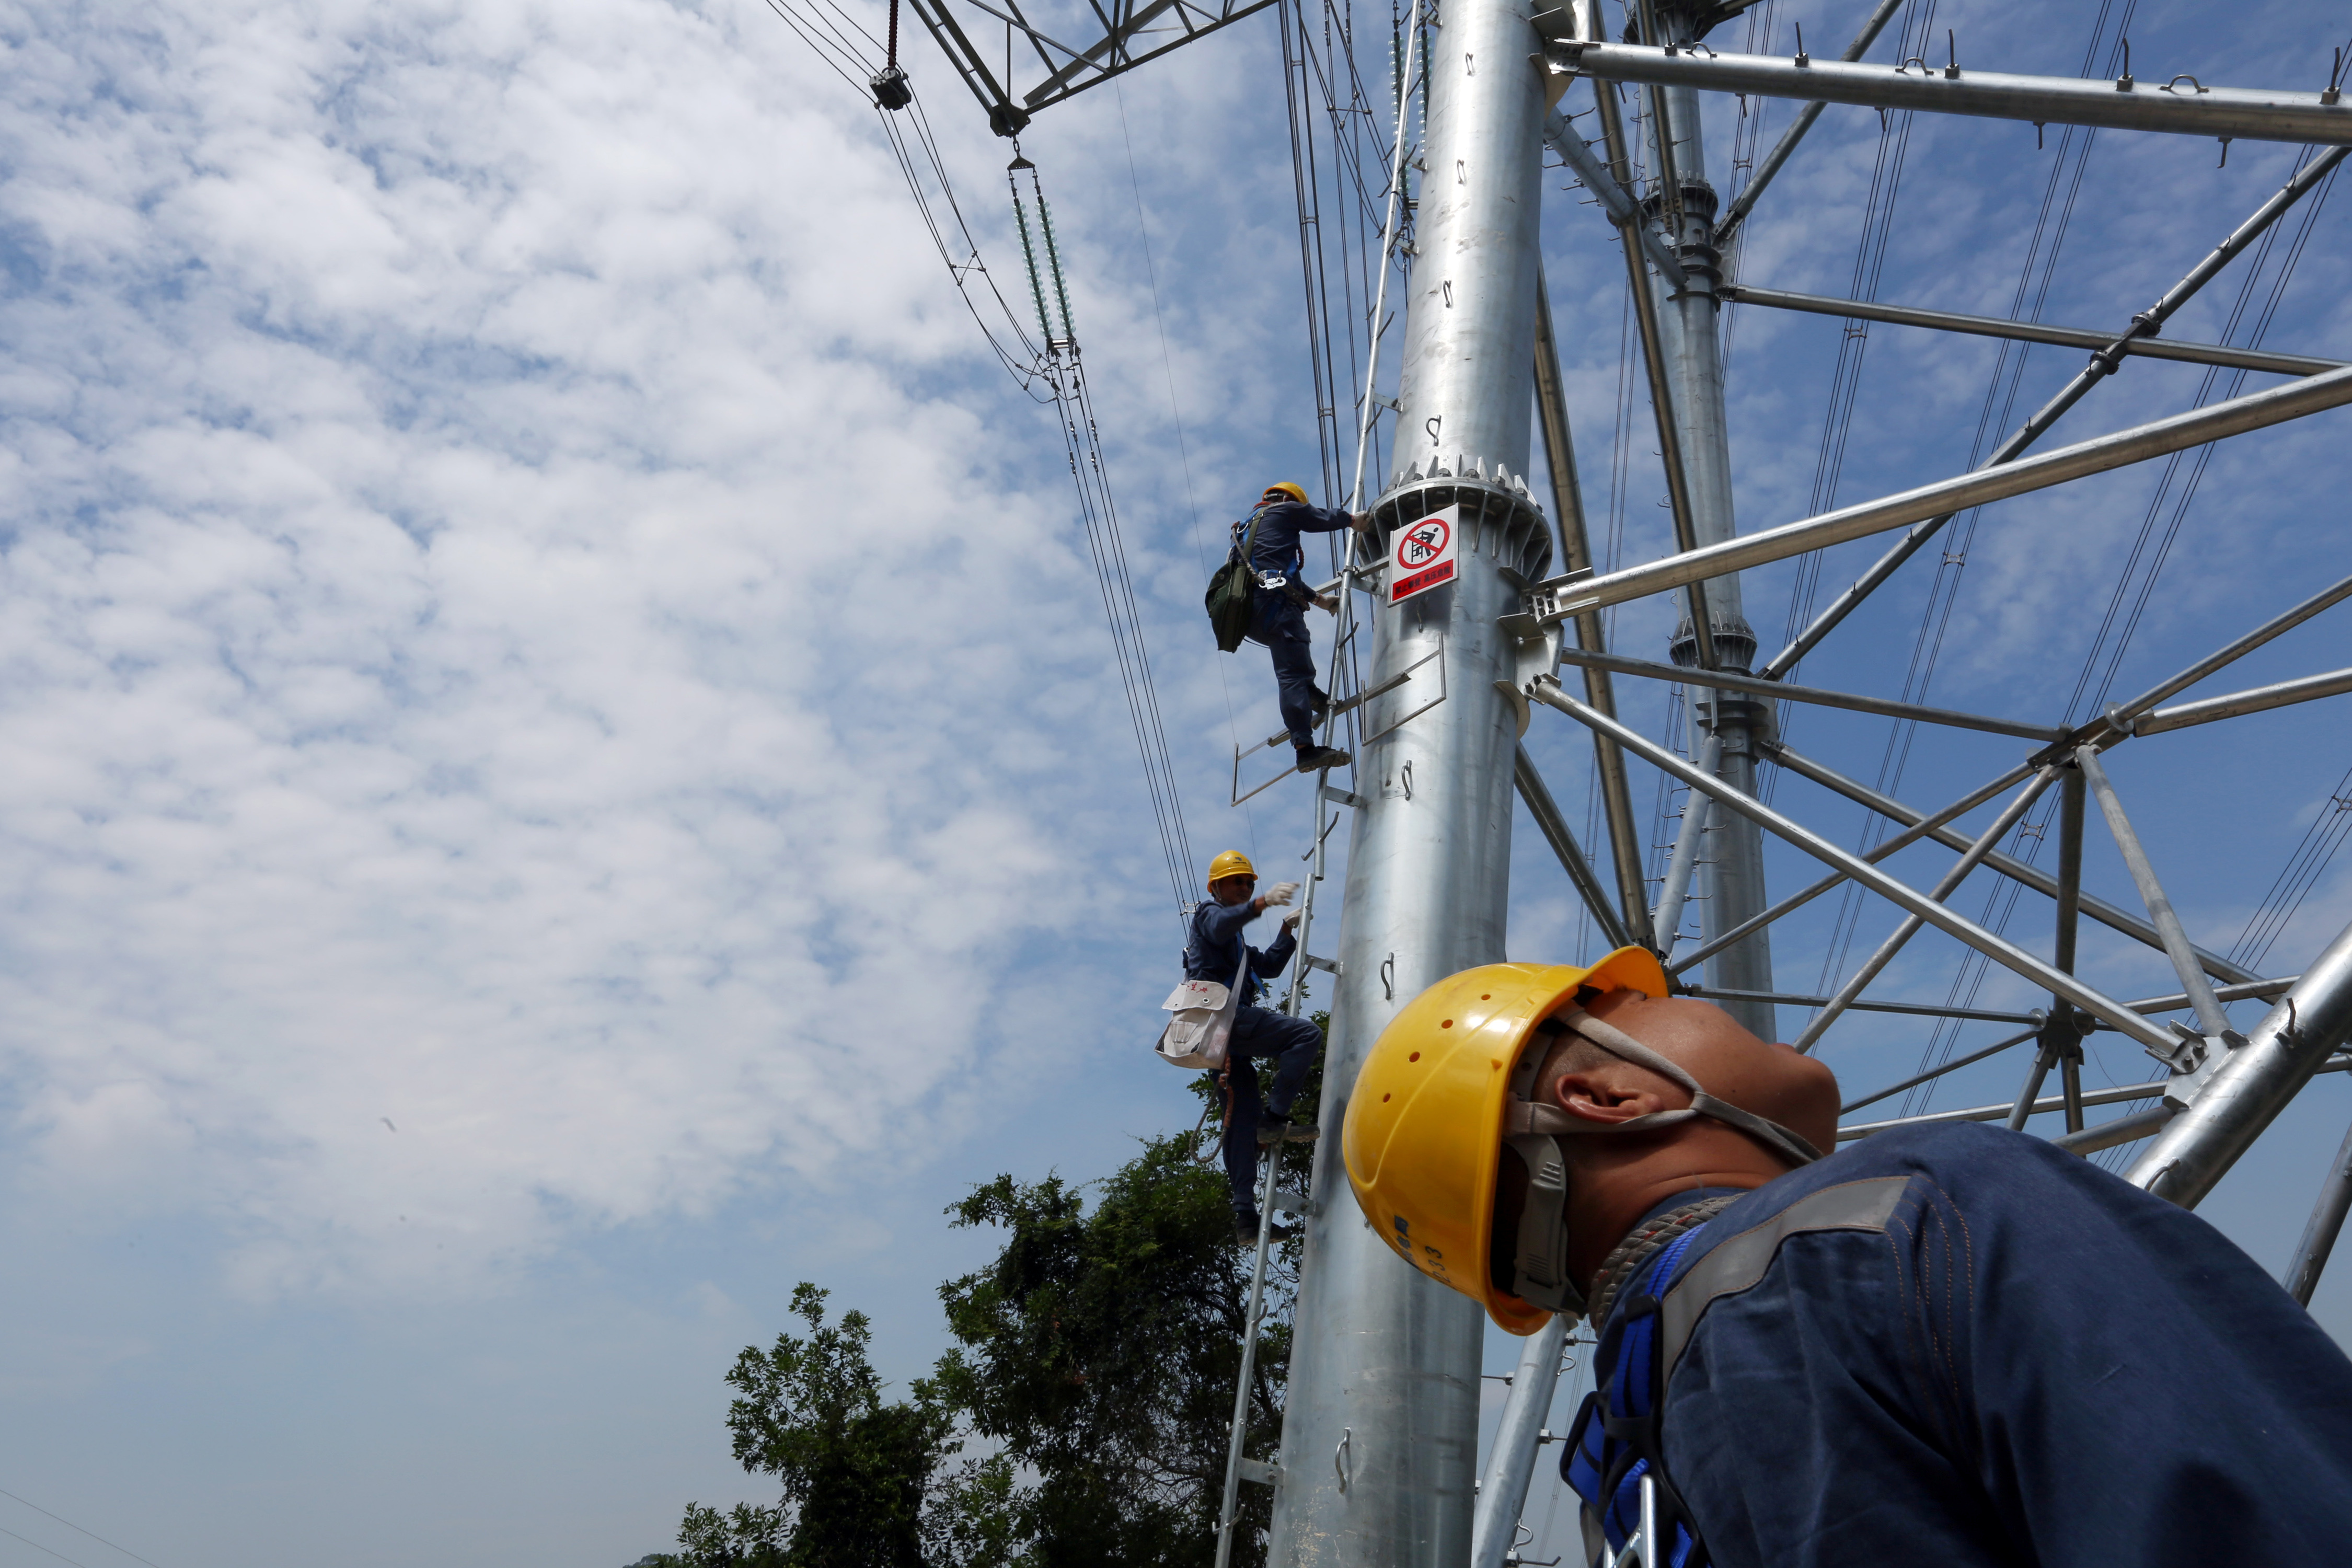 Workers of grid operator China Southern Power Grid climb a transmission tower to inspect power cables in Dongguan, Guangdong province, China May 29, 2018. Picture taken May 29, 2018. REUTERS/Stringer/Files